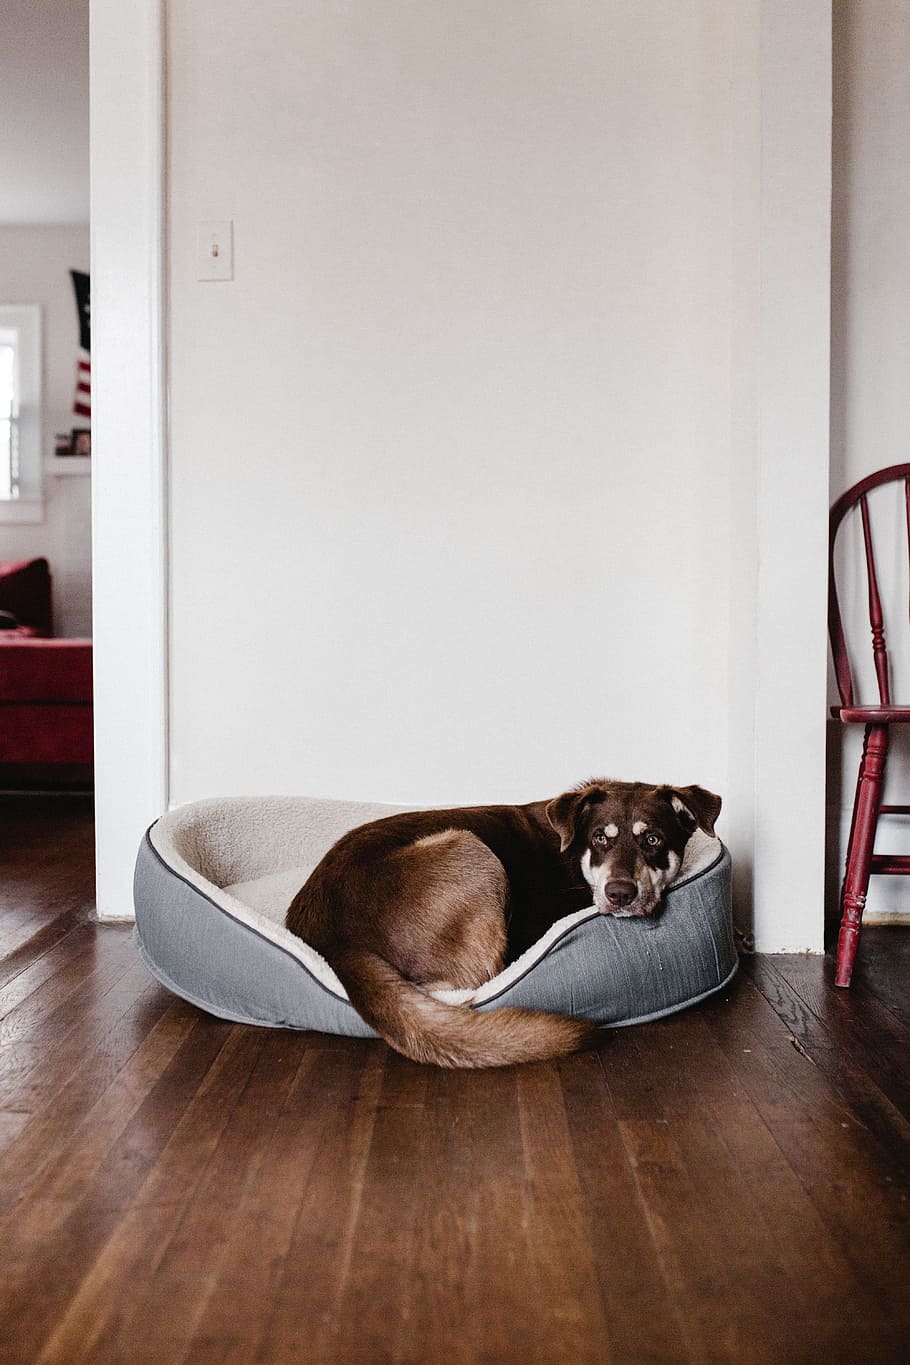 short-coated liver and white dog prone lying on pet bed inside room